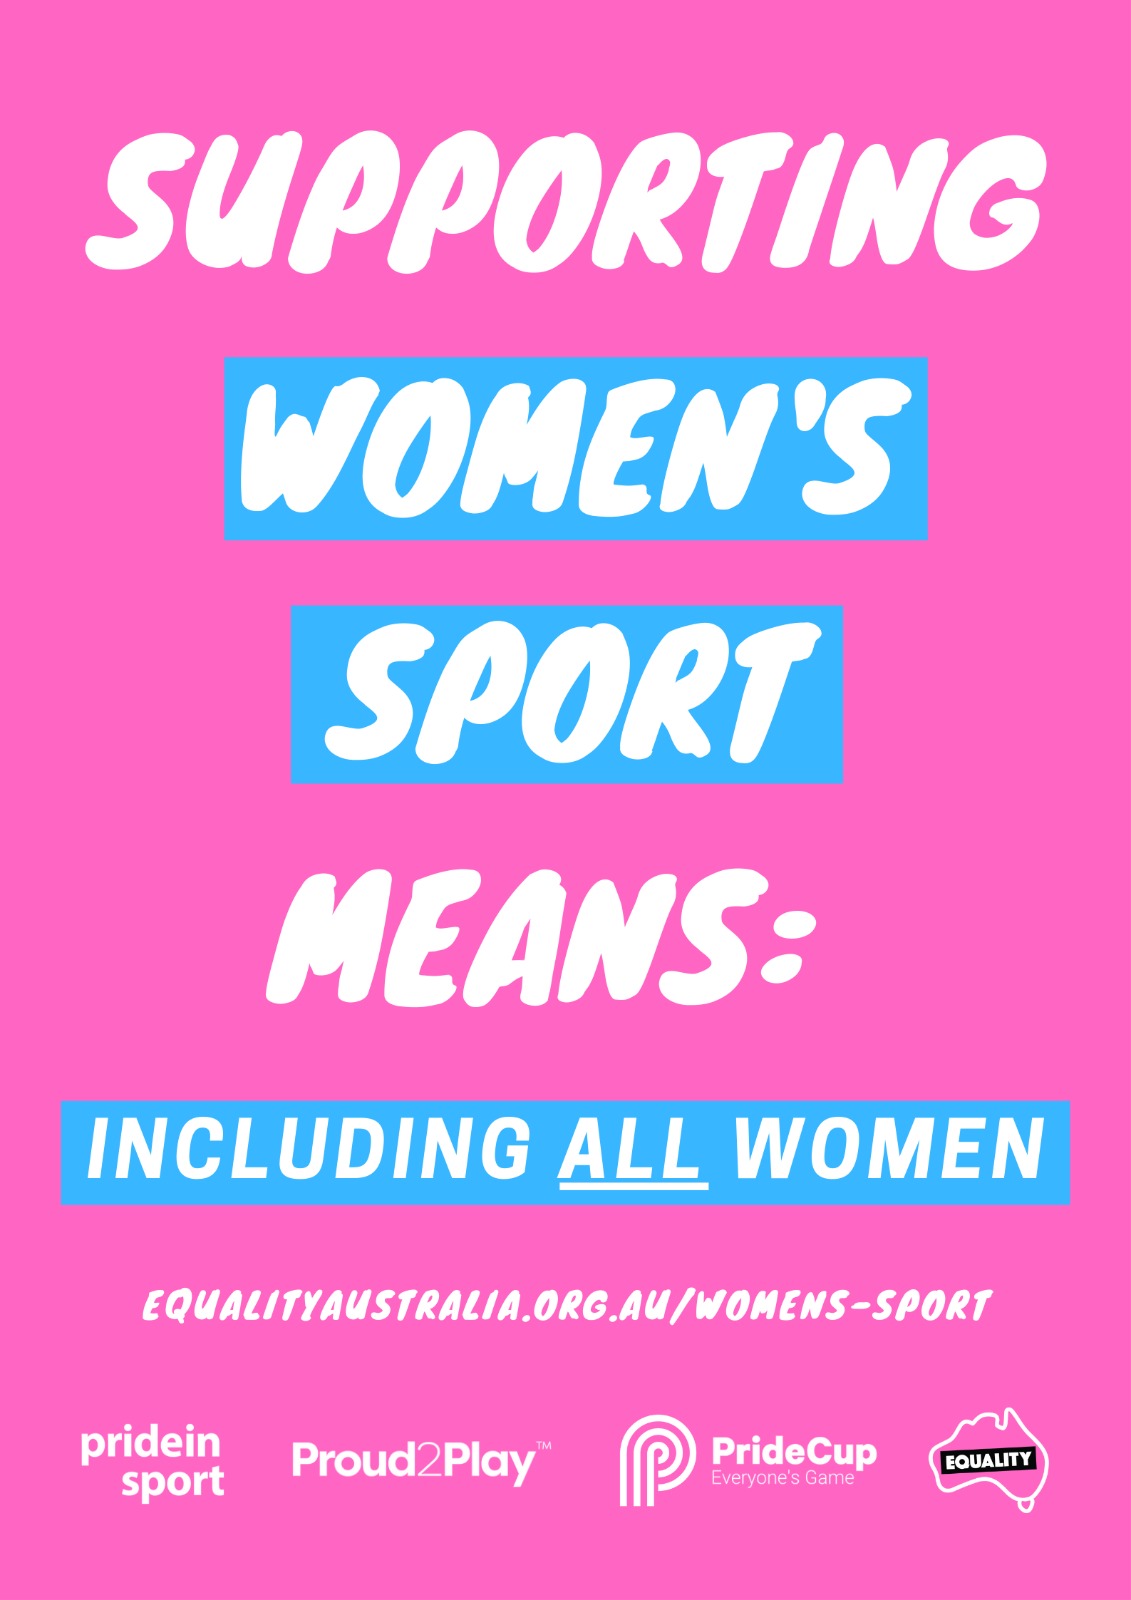 Supporting women's sport mean including all women